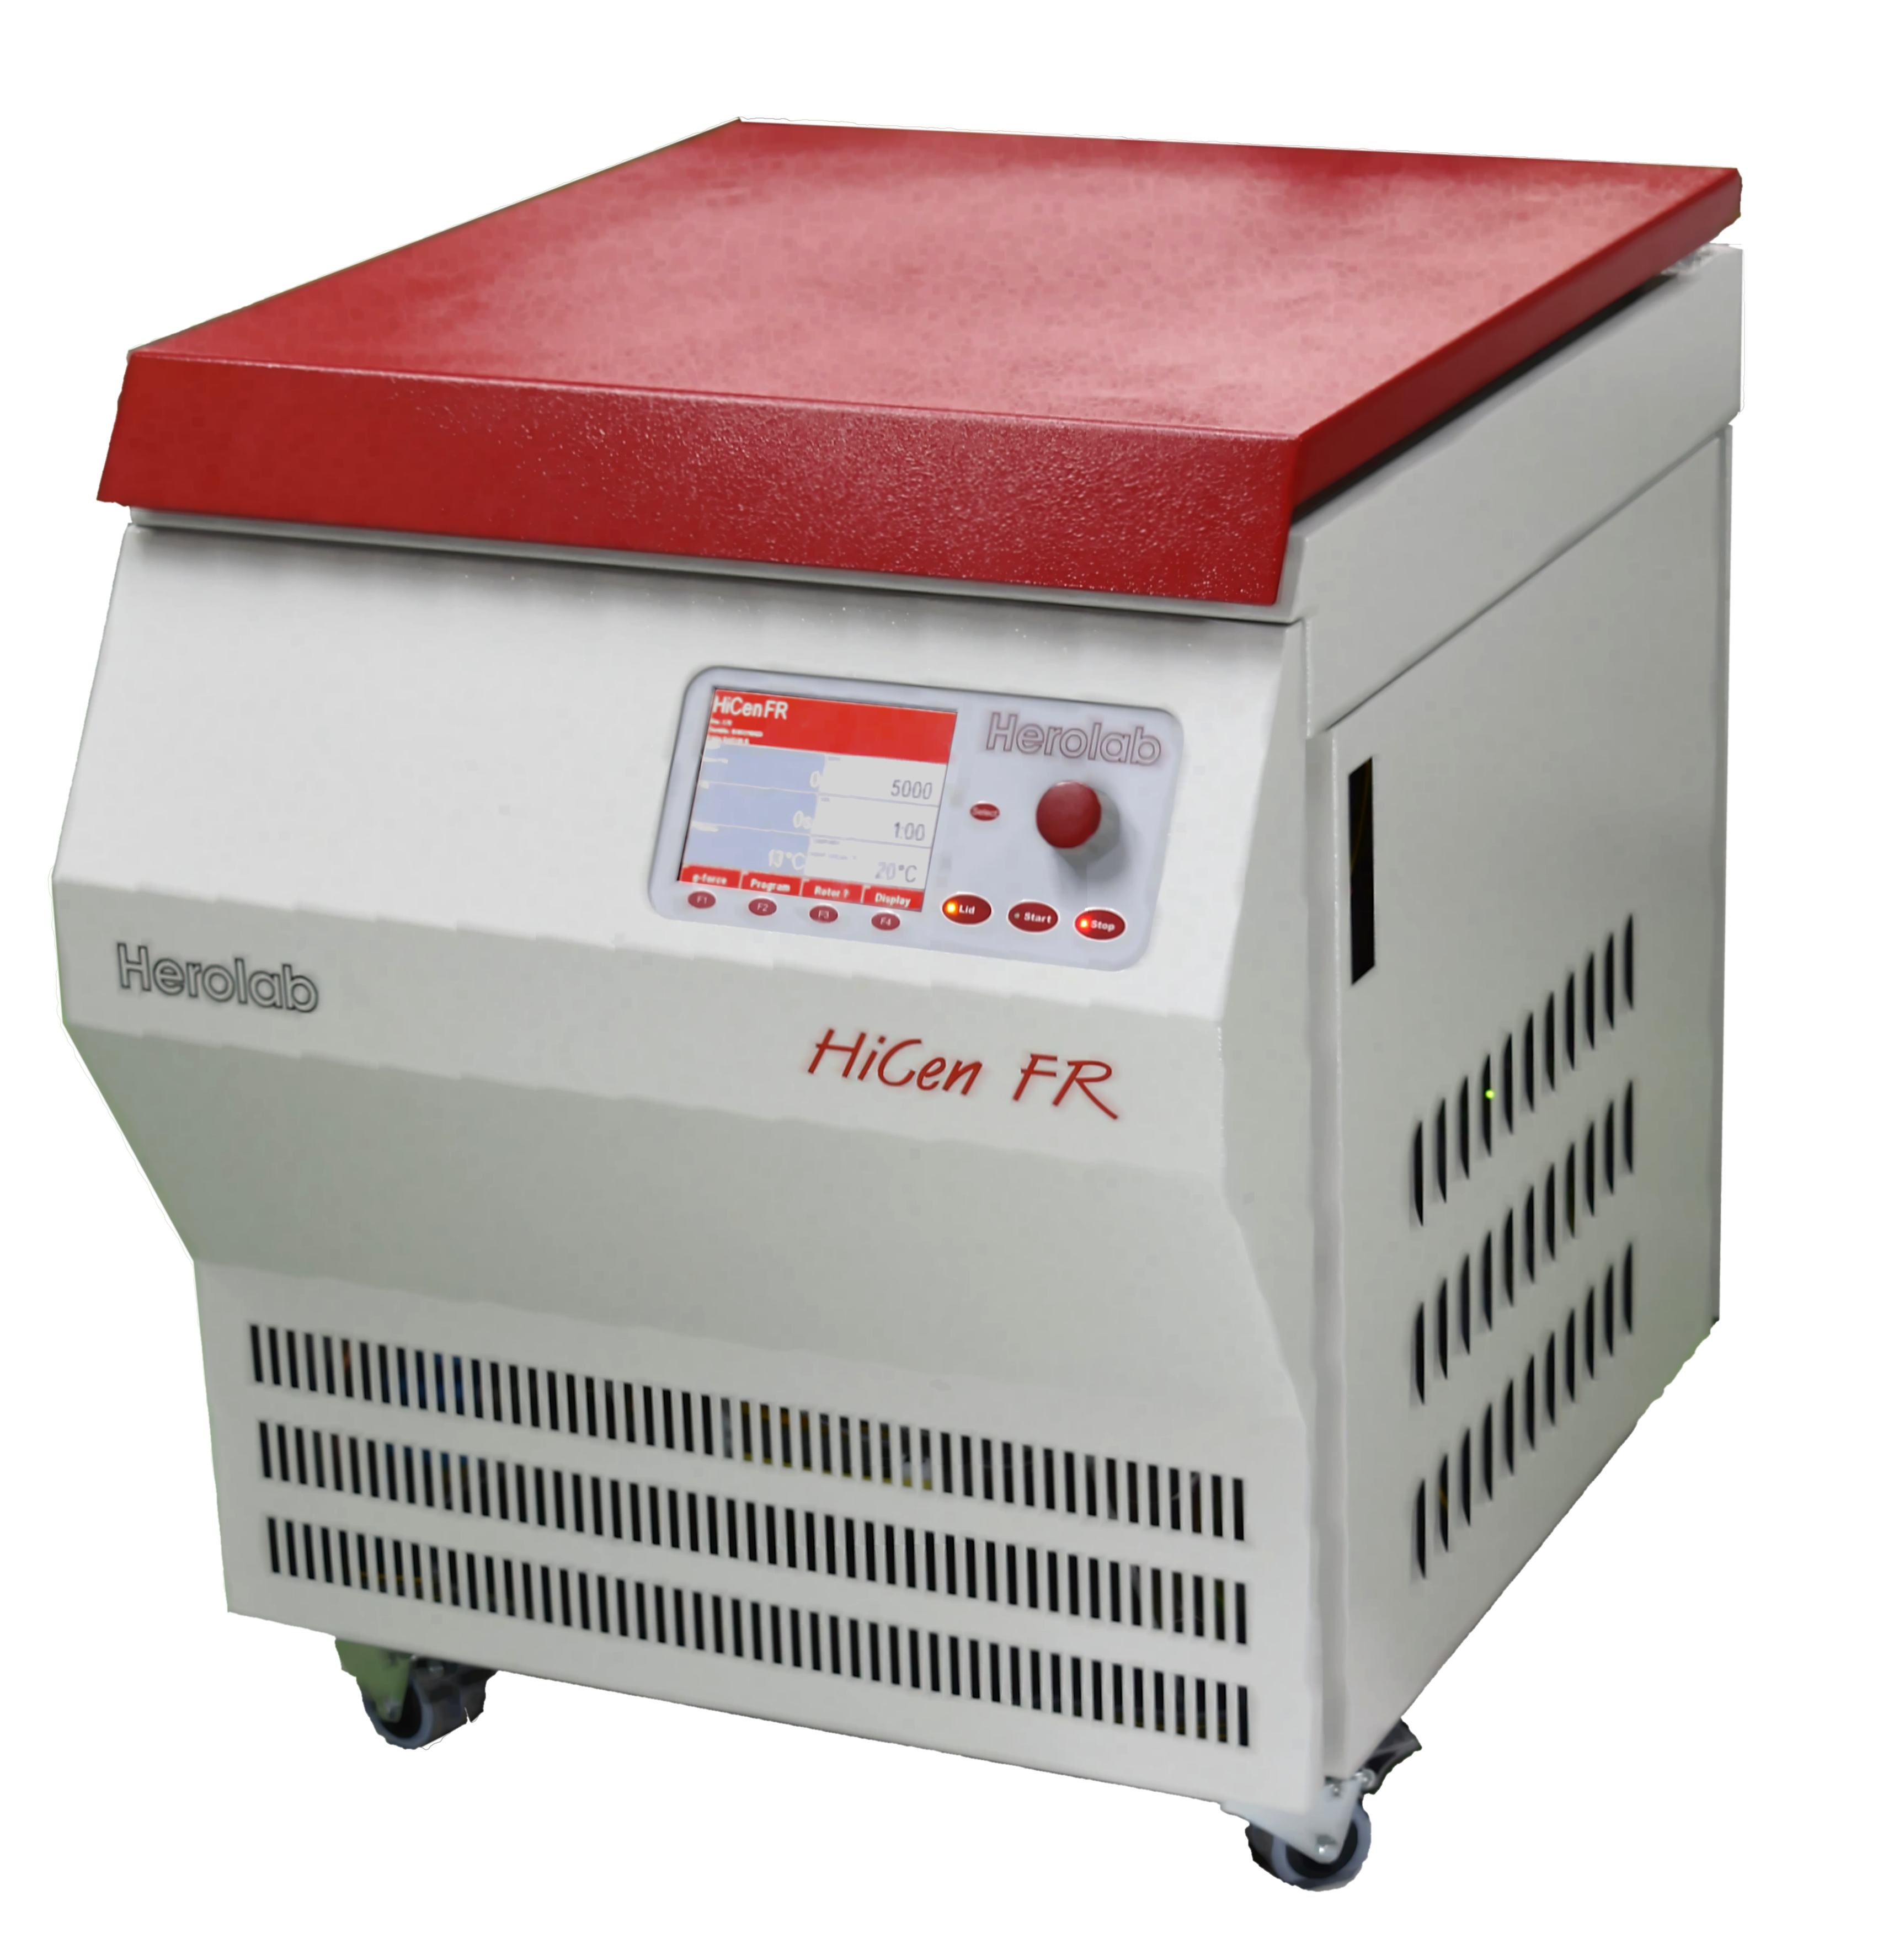 Herolab Table Top And Floor Model Centrifuges